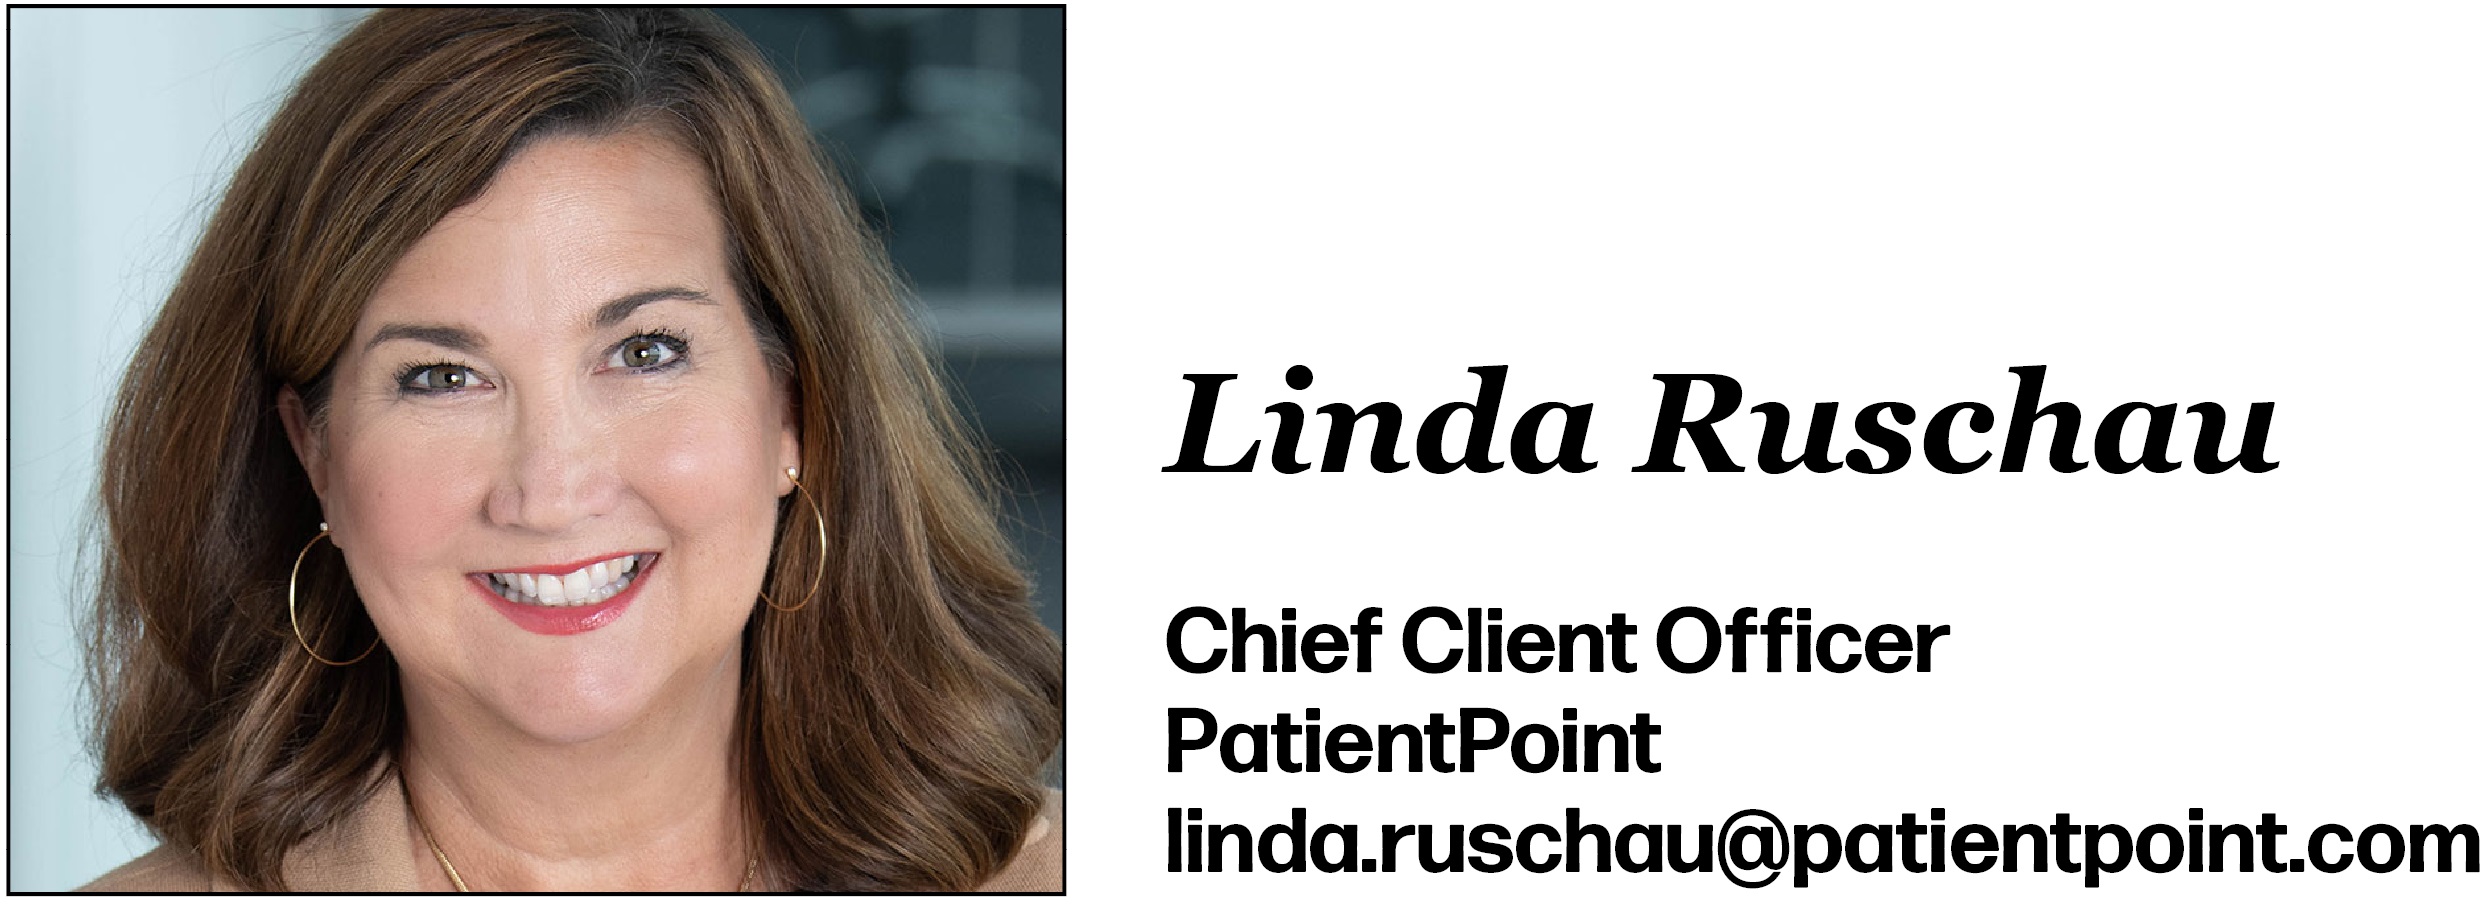 Linda Ruschau is Chief Client Officer at PatientPoint. Her email is Linda.Ruschau@patientpoint.com.